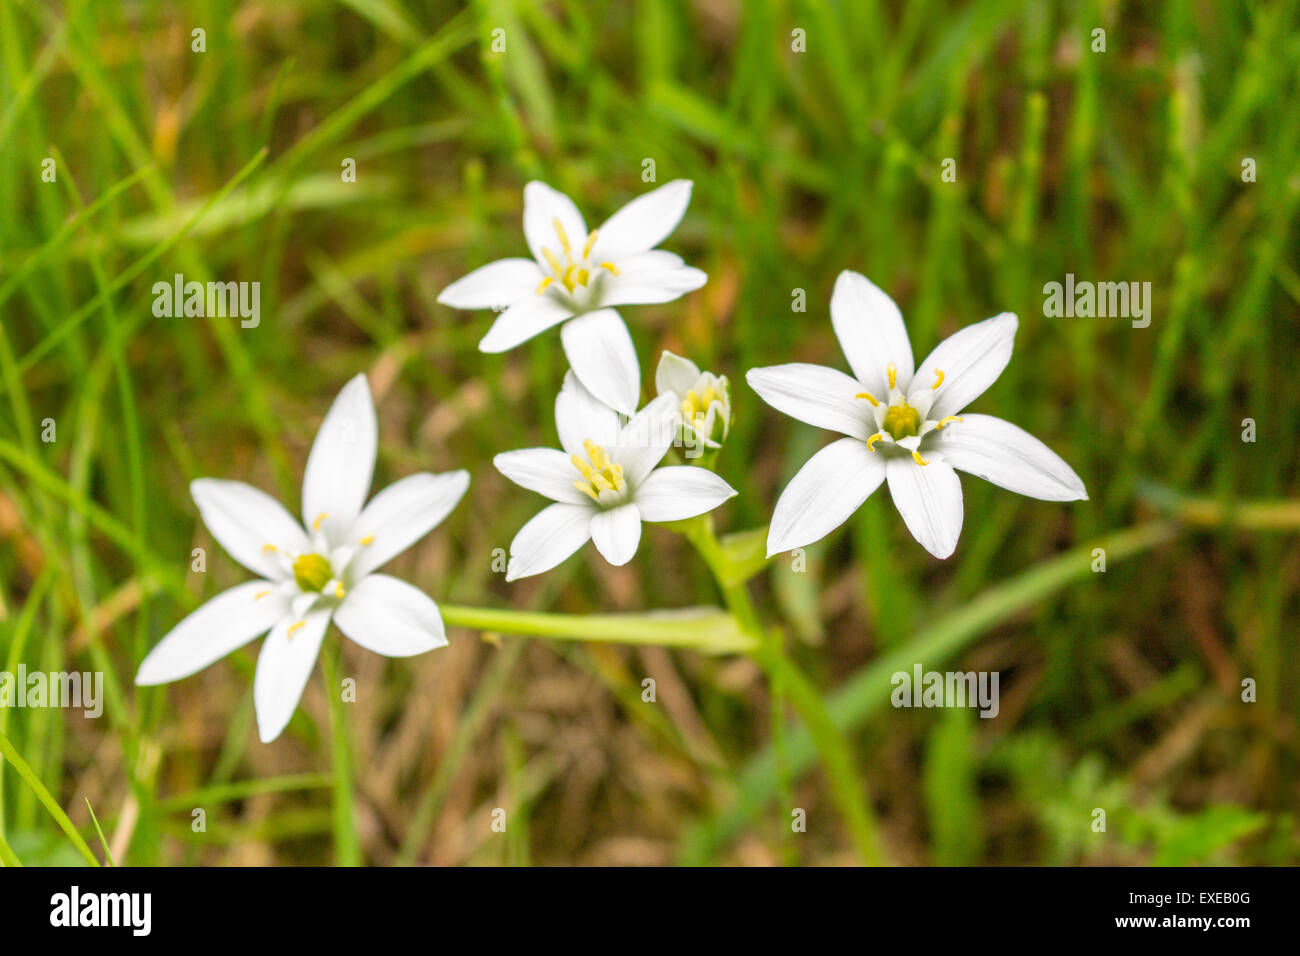 white flowers with 6 petals on green weeds Stock Photo